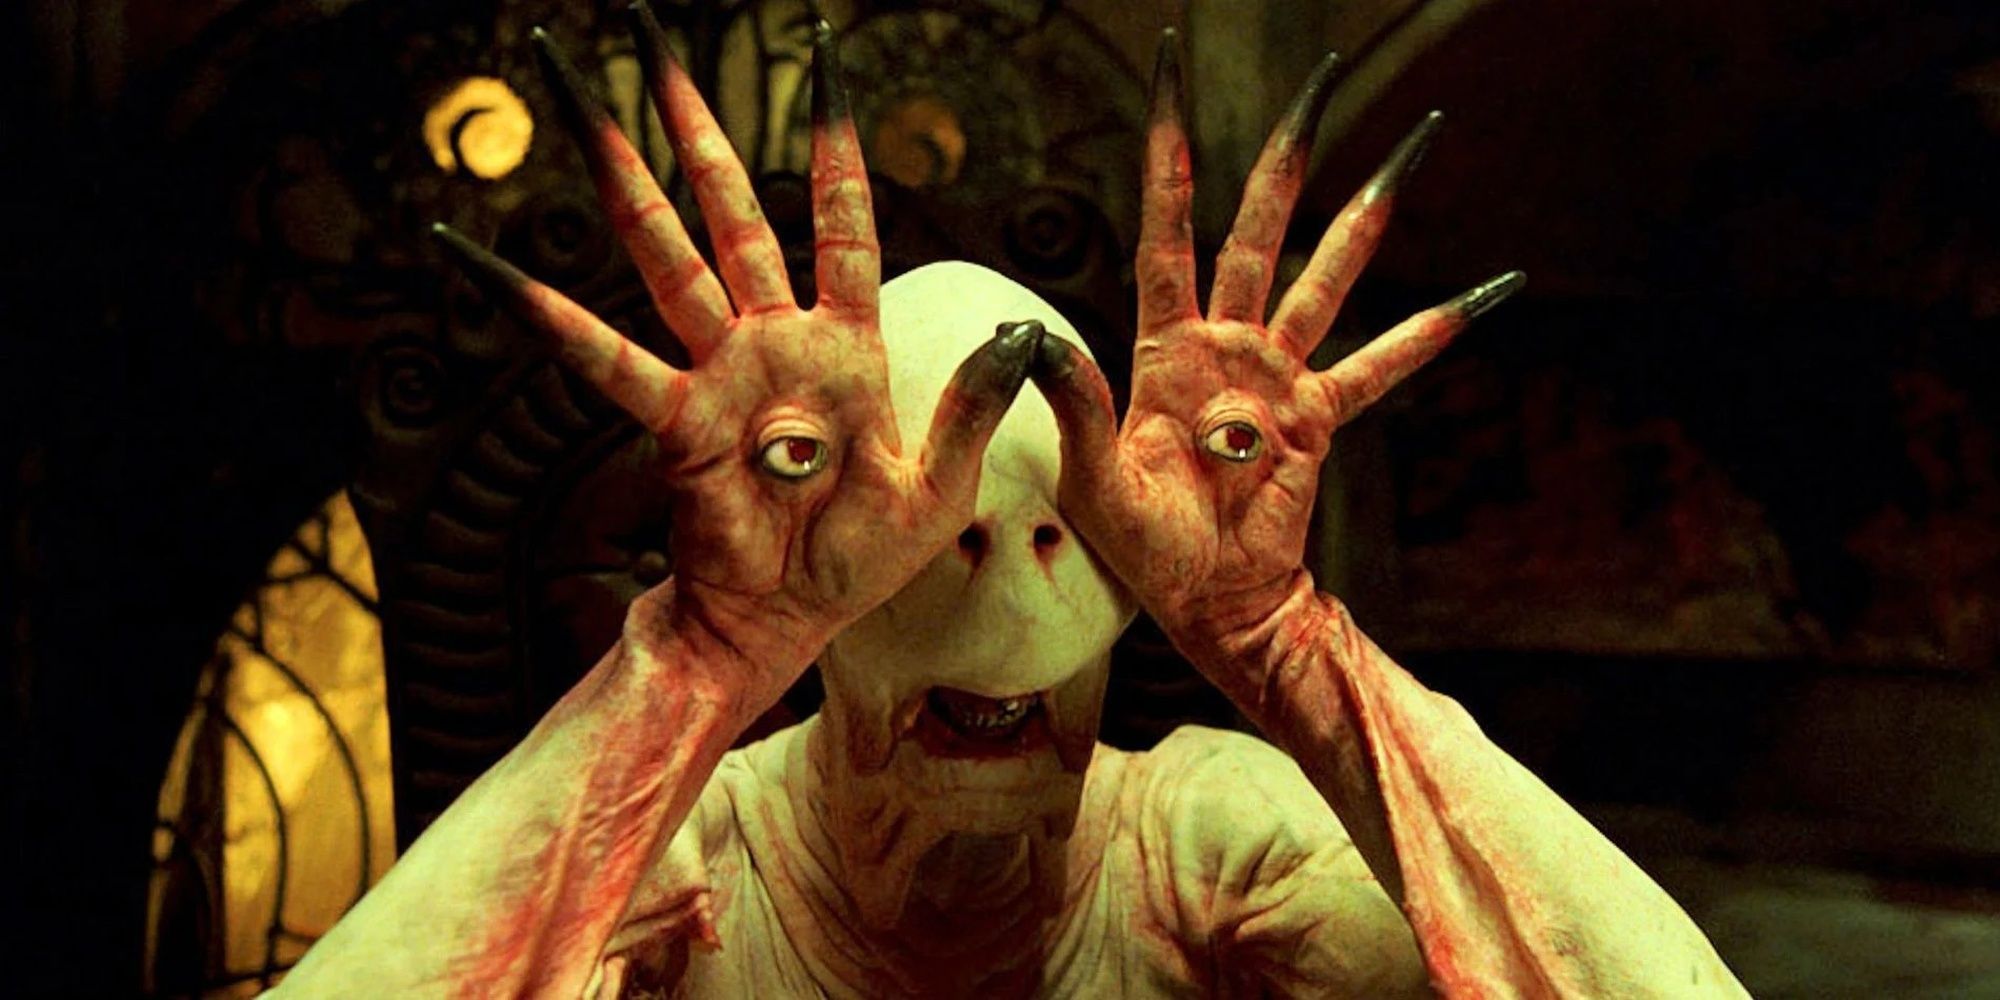 The Pale Man searching in Pan's Labyrinth